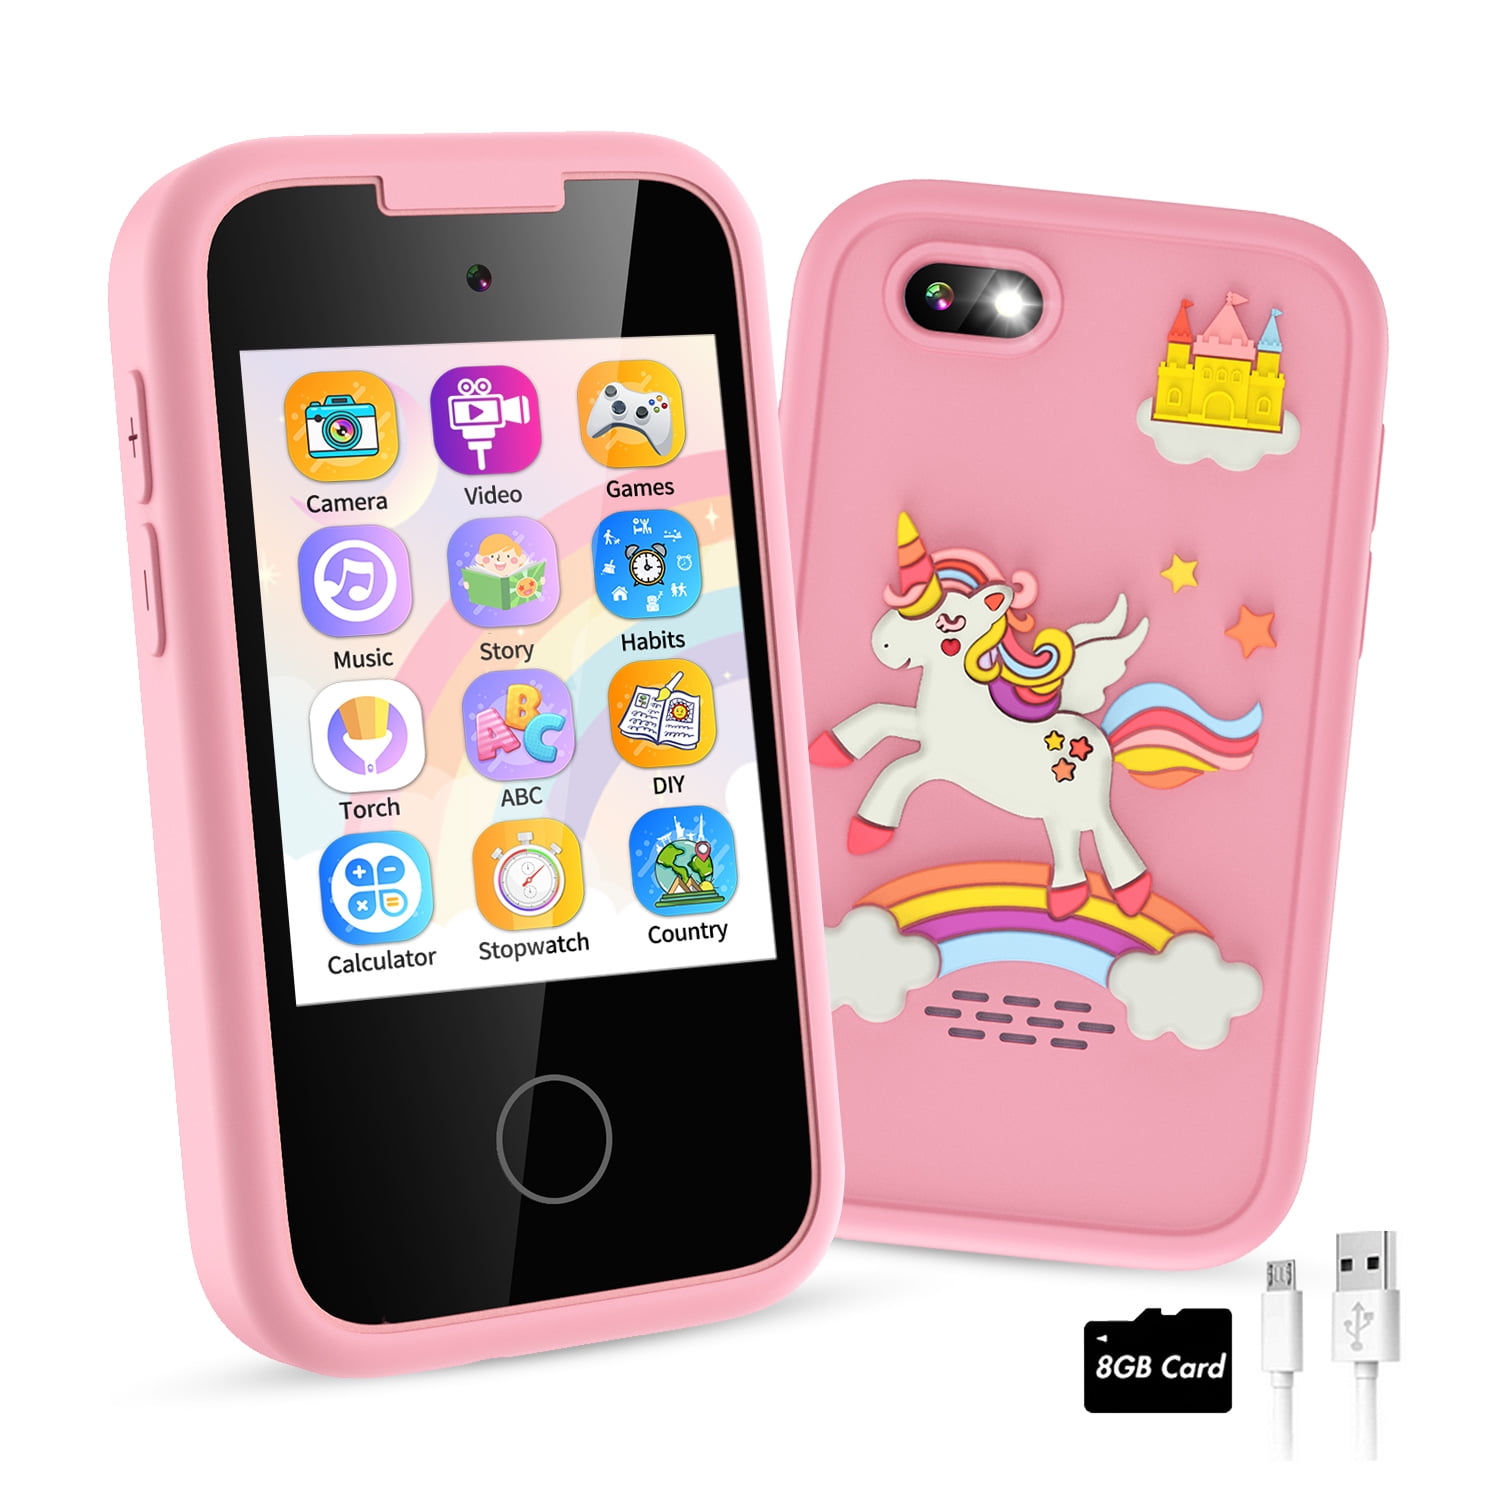 Sueseip Smart Phone for Kids,Touchscreen Kids Phone Unicorn Gifts for Girls  Age 6-8, Toy